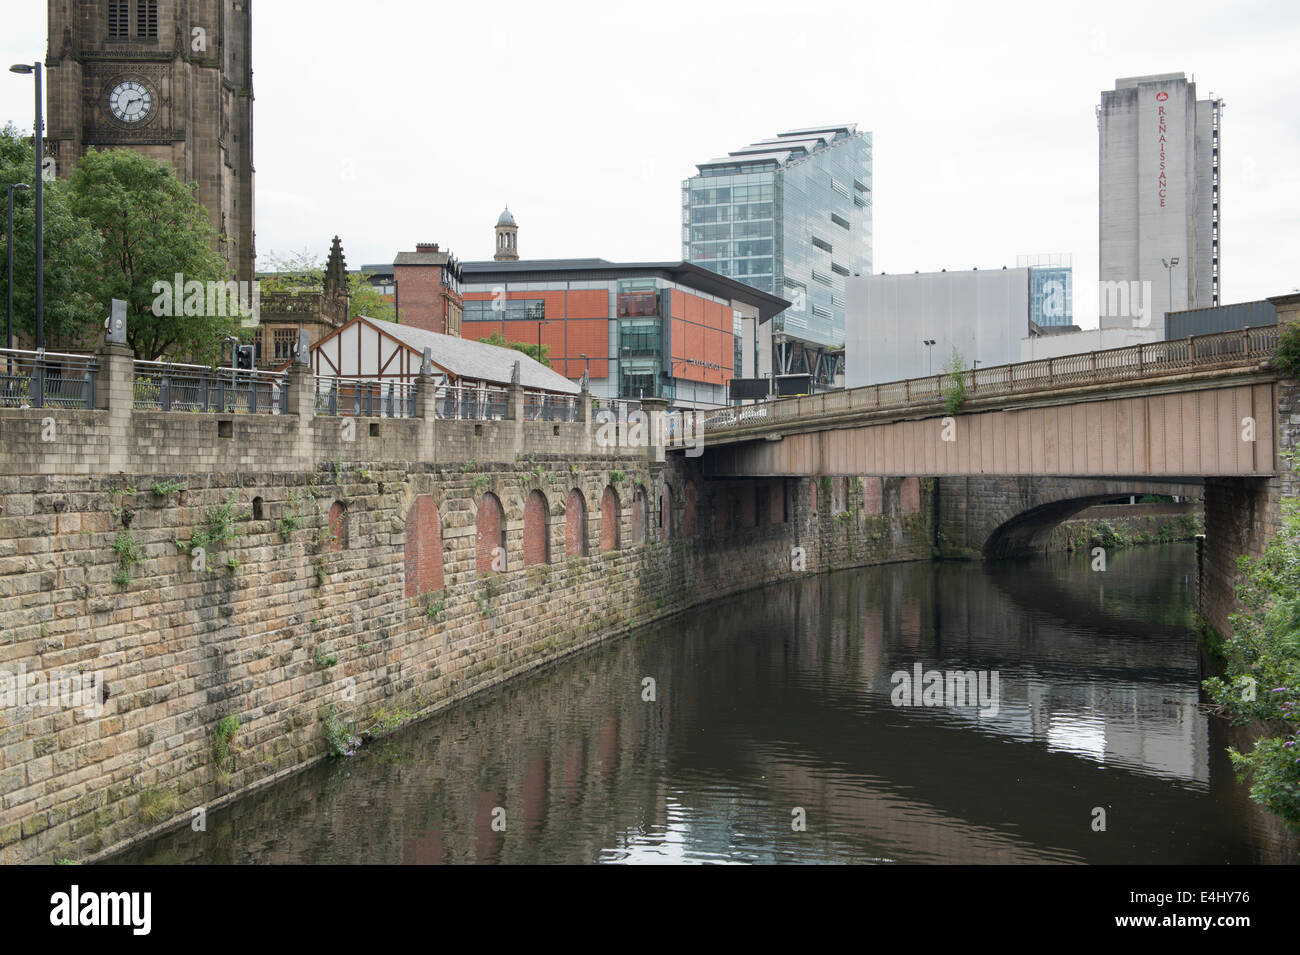 A view of Palatine Bridge / Cathedral Approach, and the Manchester Ship Canal / River Irwell between Salford and Manchester. Stock Photo